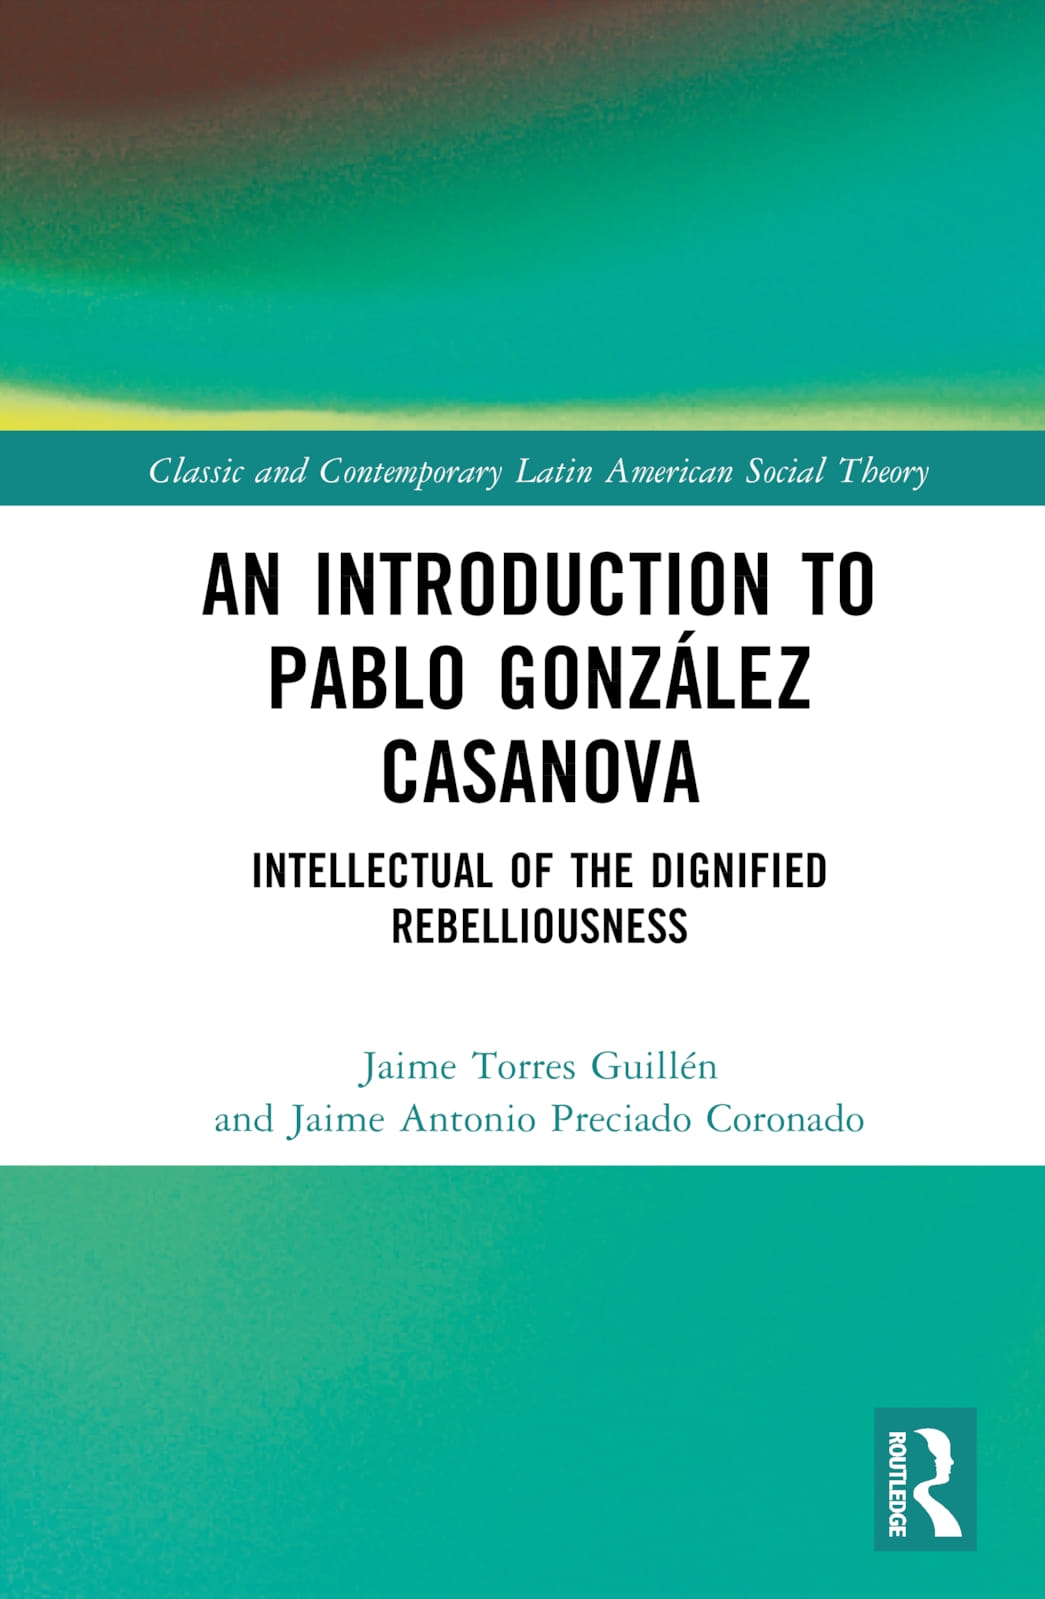 An Introduction to Pablo González Casanova: Intellectual of the Dignified Rebelliousness